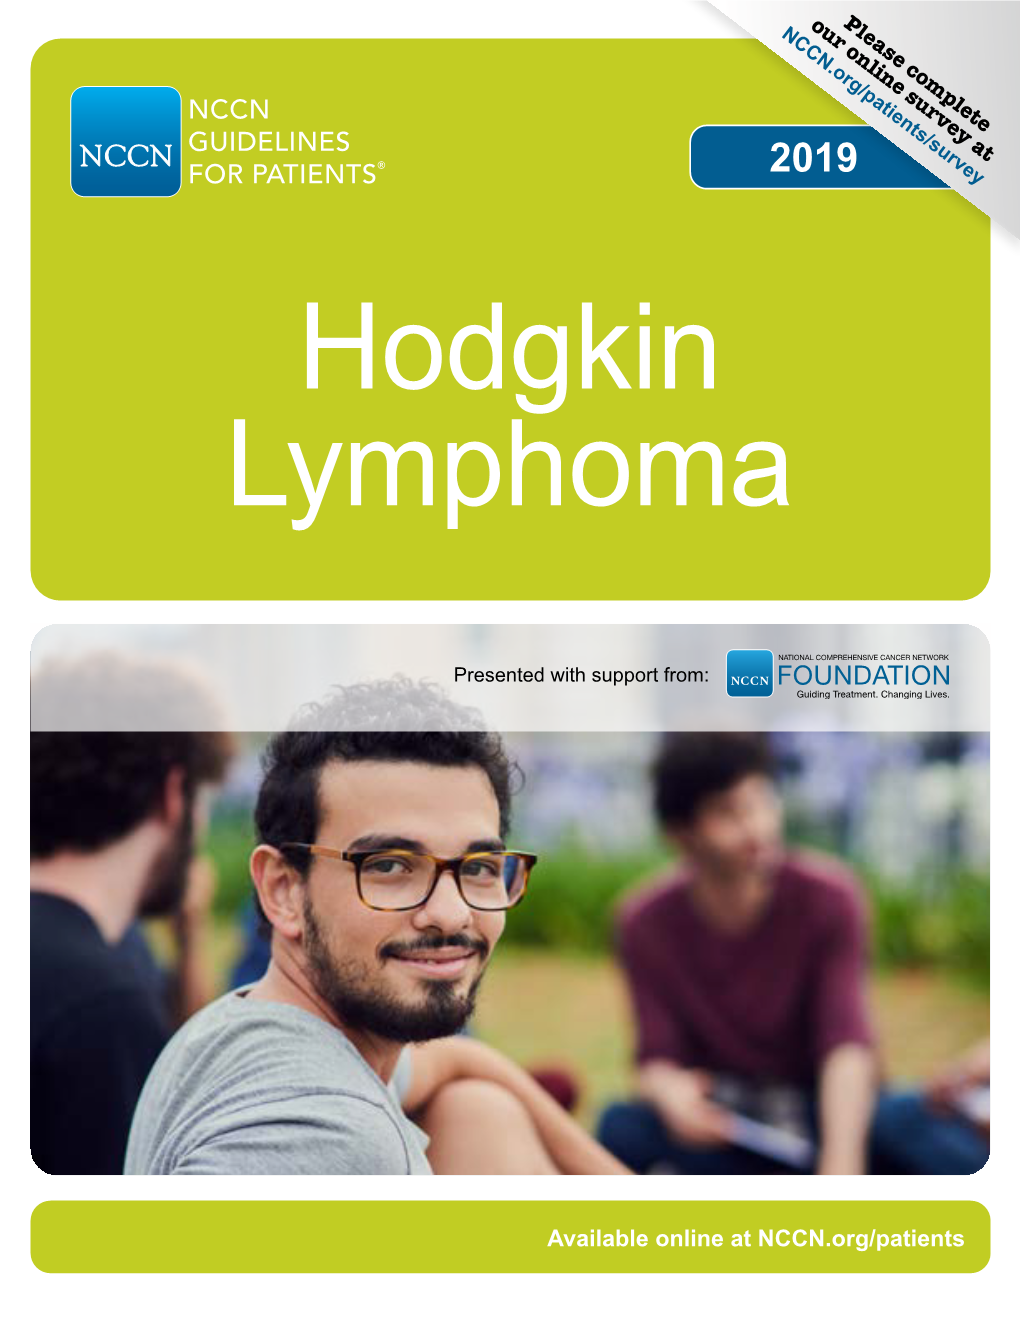 NCCN Guidelines for Patients Hodgkin Lymphoma 2019